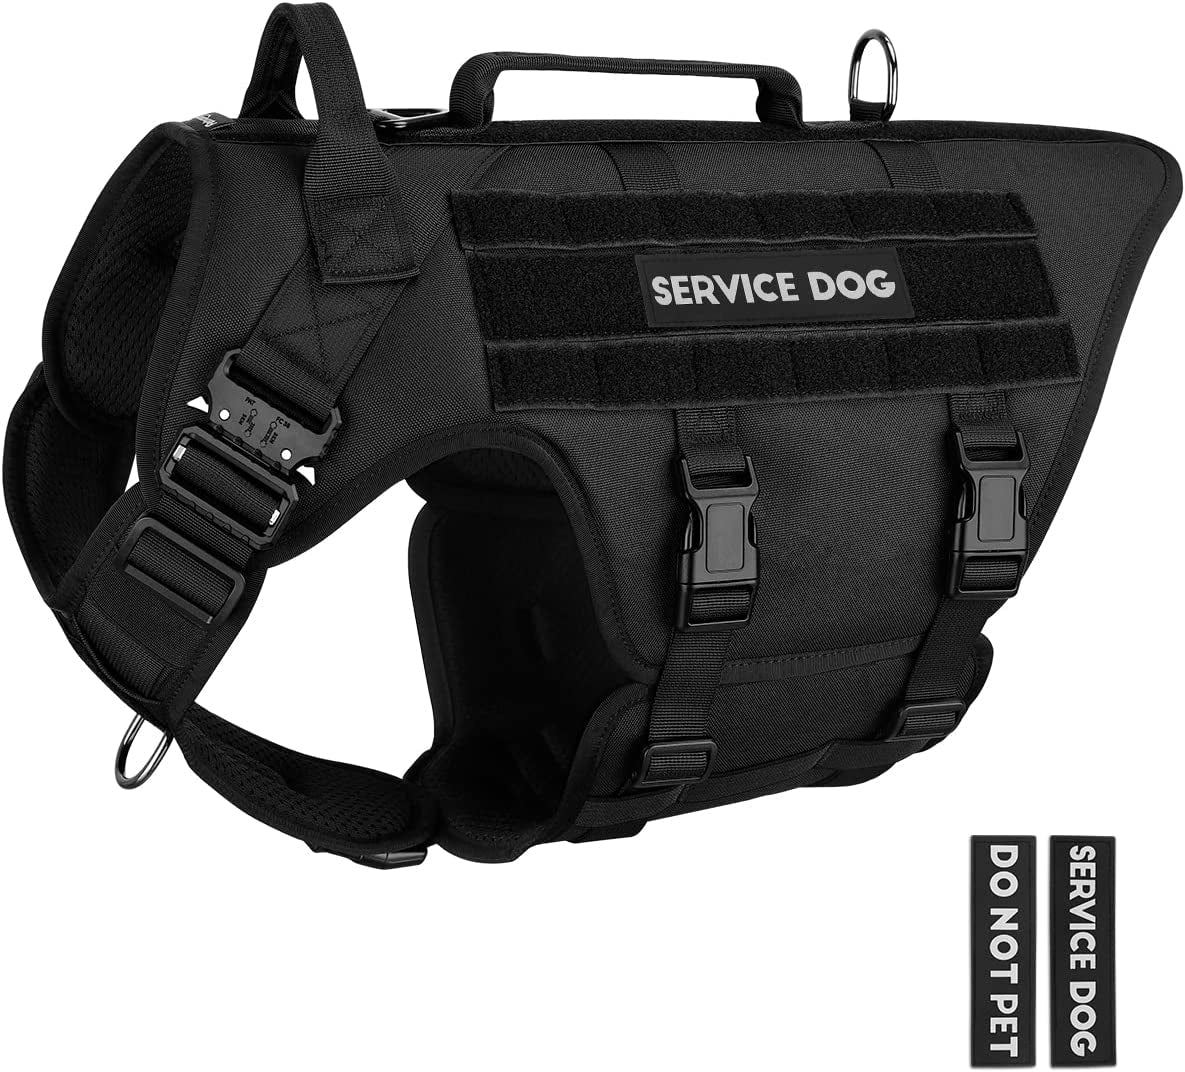 Tactical Dog Harness - PETNANNY Service Dog Vest for Large Dogs Fully Body Coverage in Training Dog Harness with 2 Reflective Dog Patches, Handle, Hook and Loop Panels, Walking Hunting Dog MOLLE Vest Animals & Pet Supplies > Pet Supplies > Dog Supplies > Dog Apparel PETNANNY Black Medium 